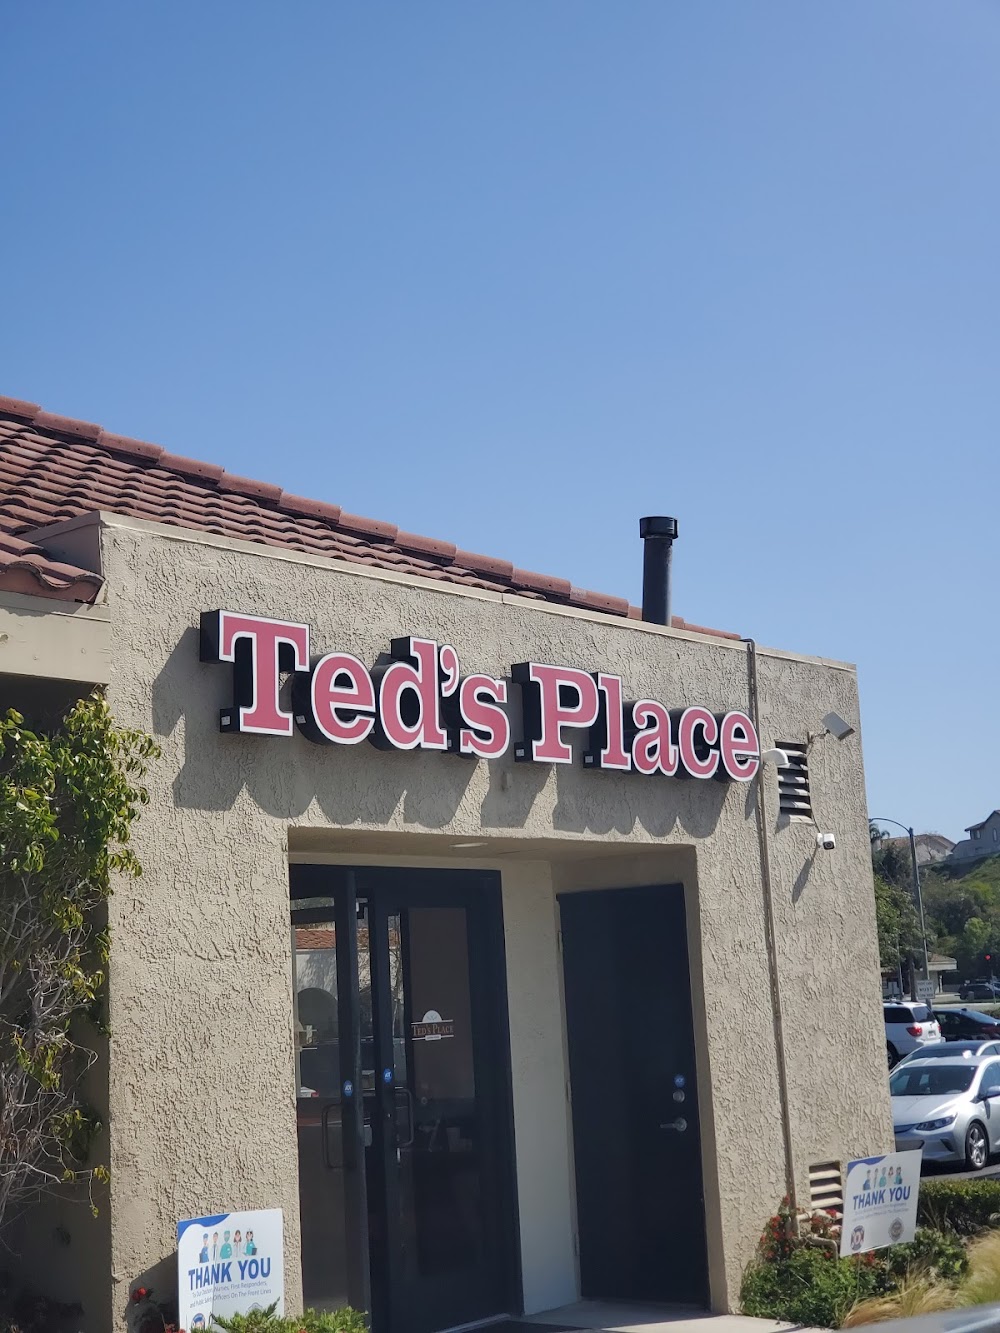 Ted’s Place